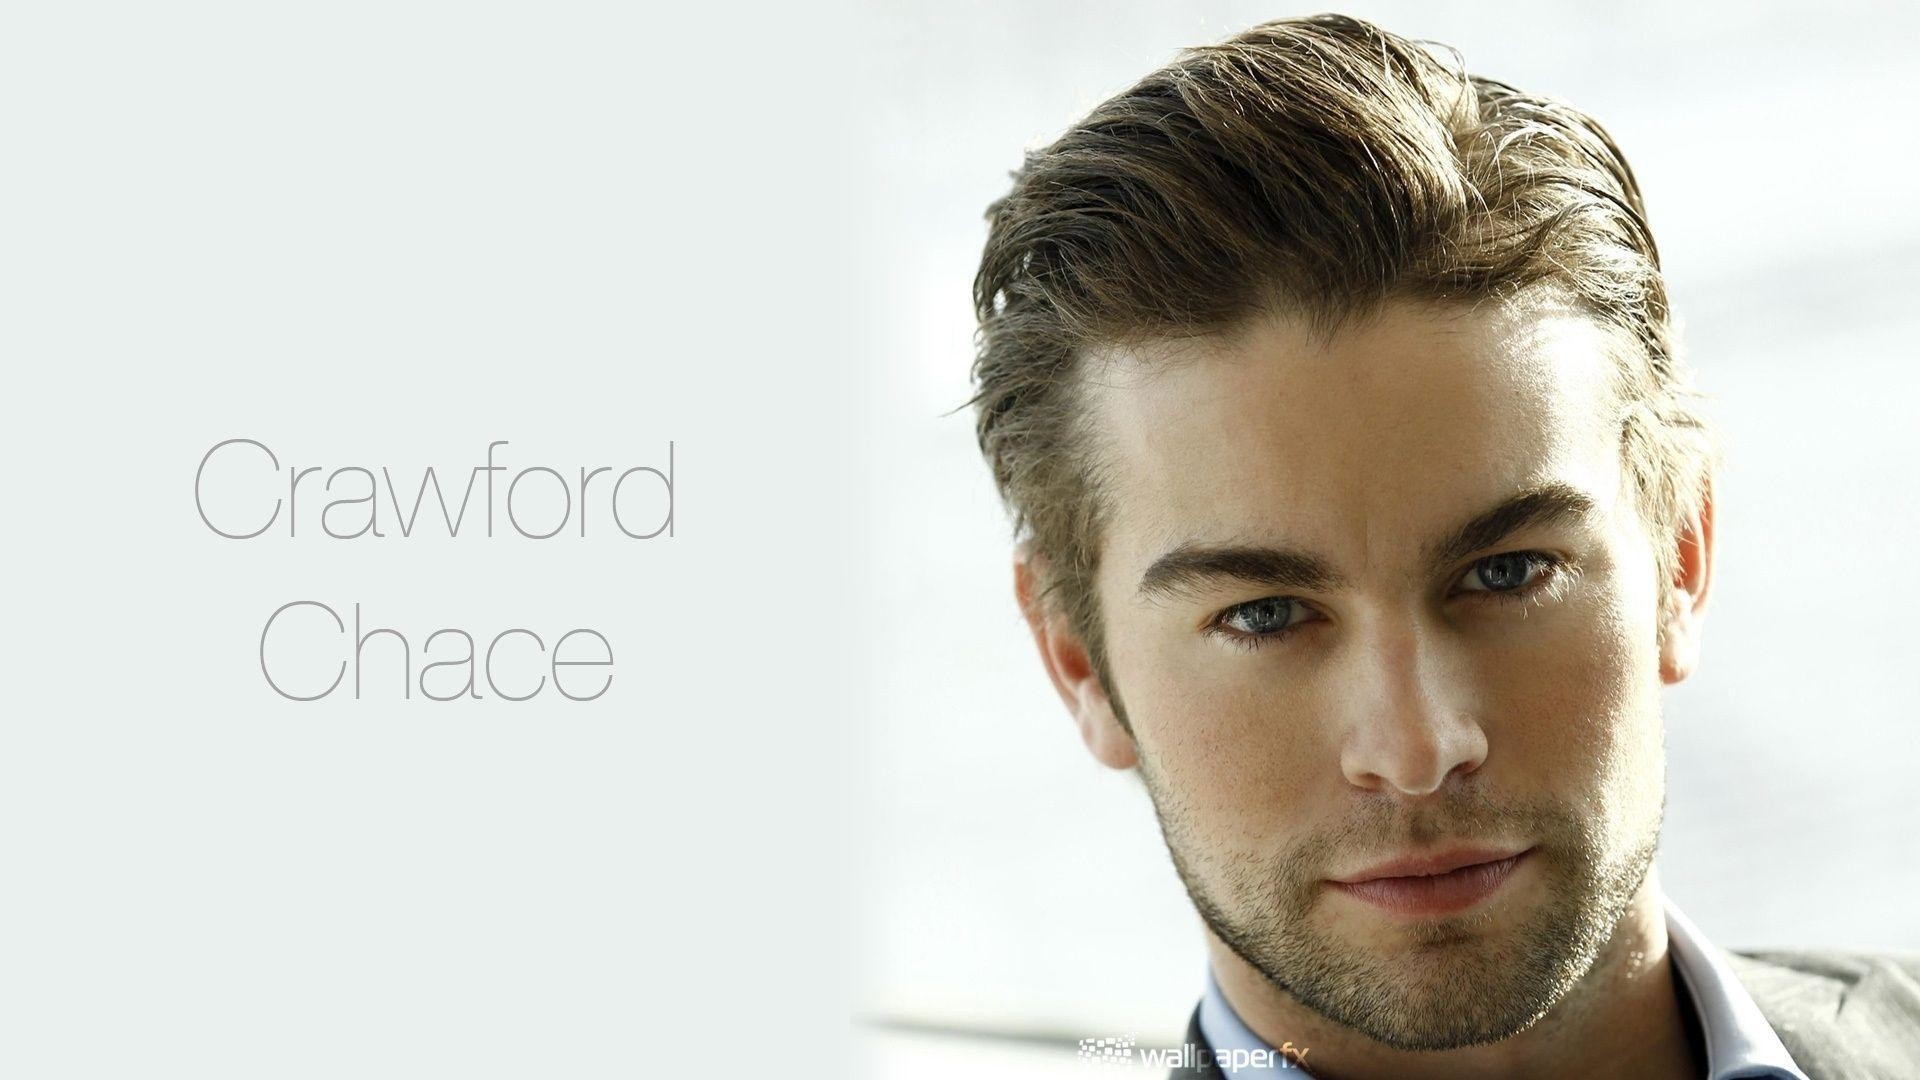 1920x1080 Fonds d'Ã©cran Chace Crawford : tous les wallpapers Chace Crawford